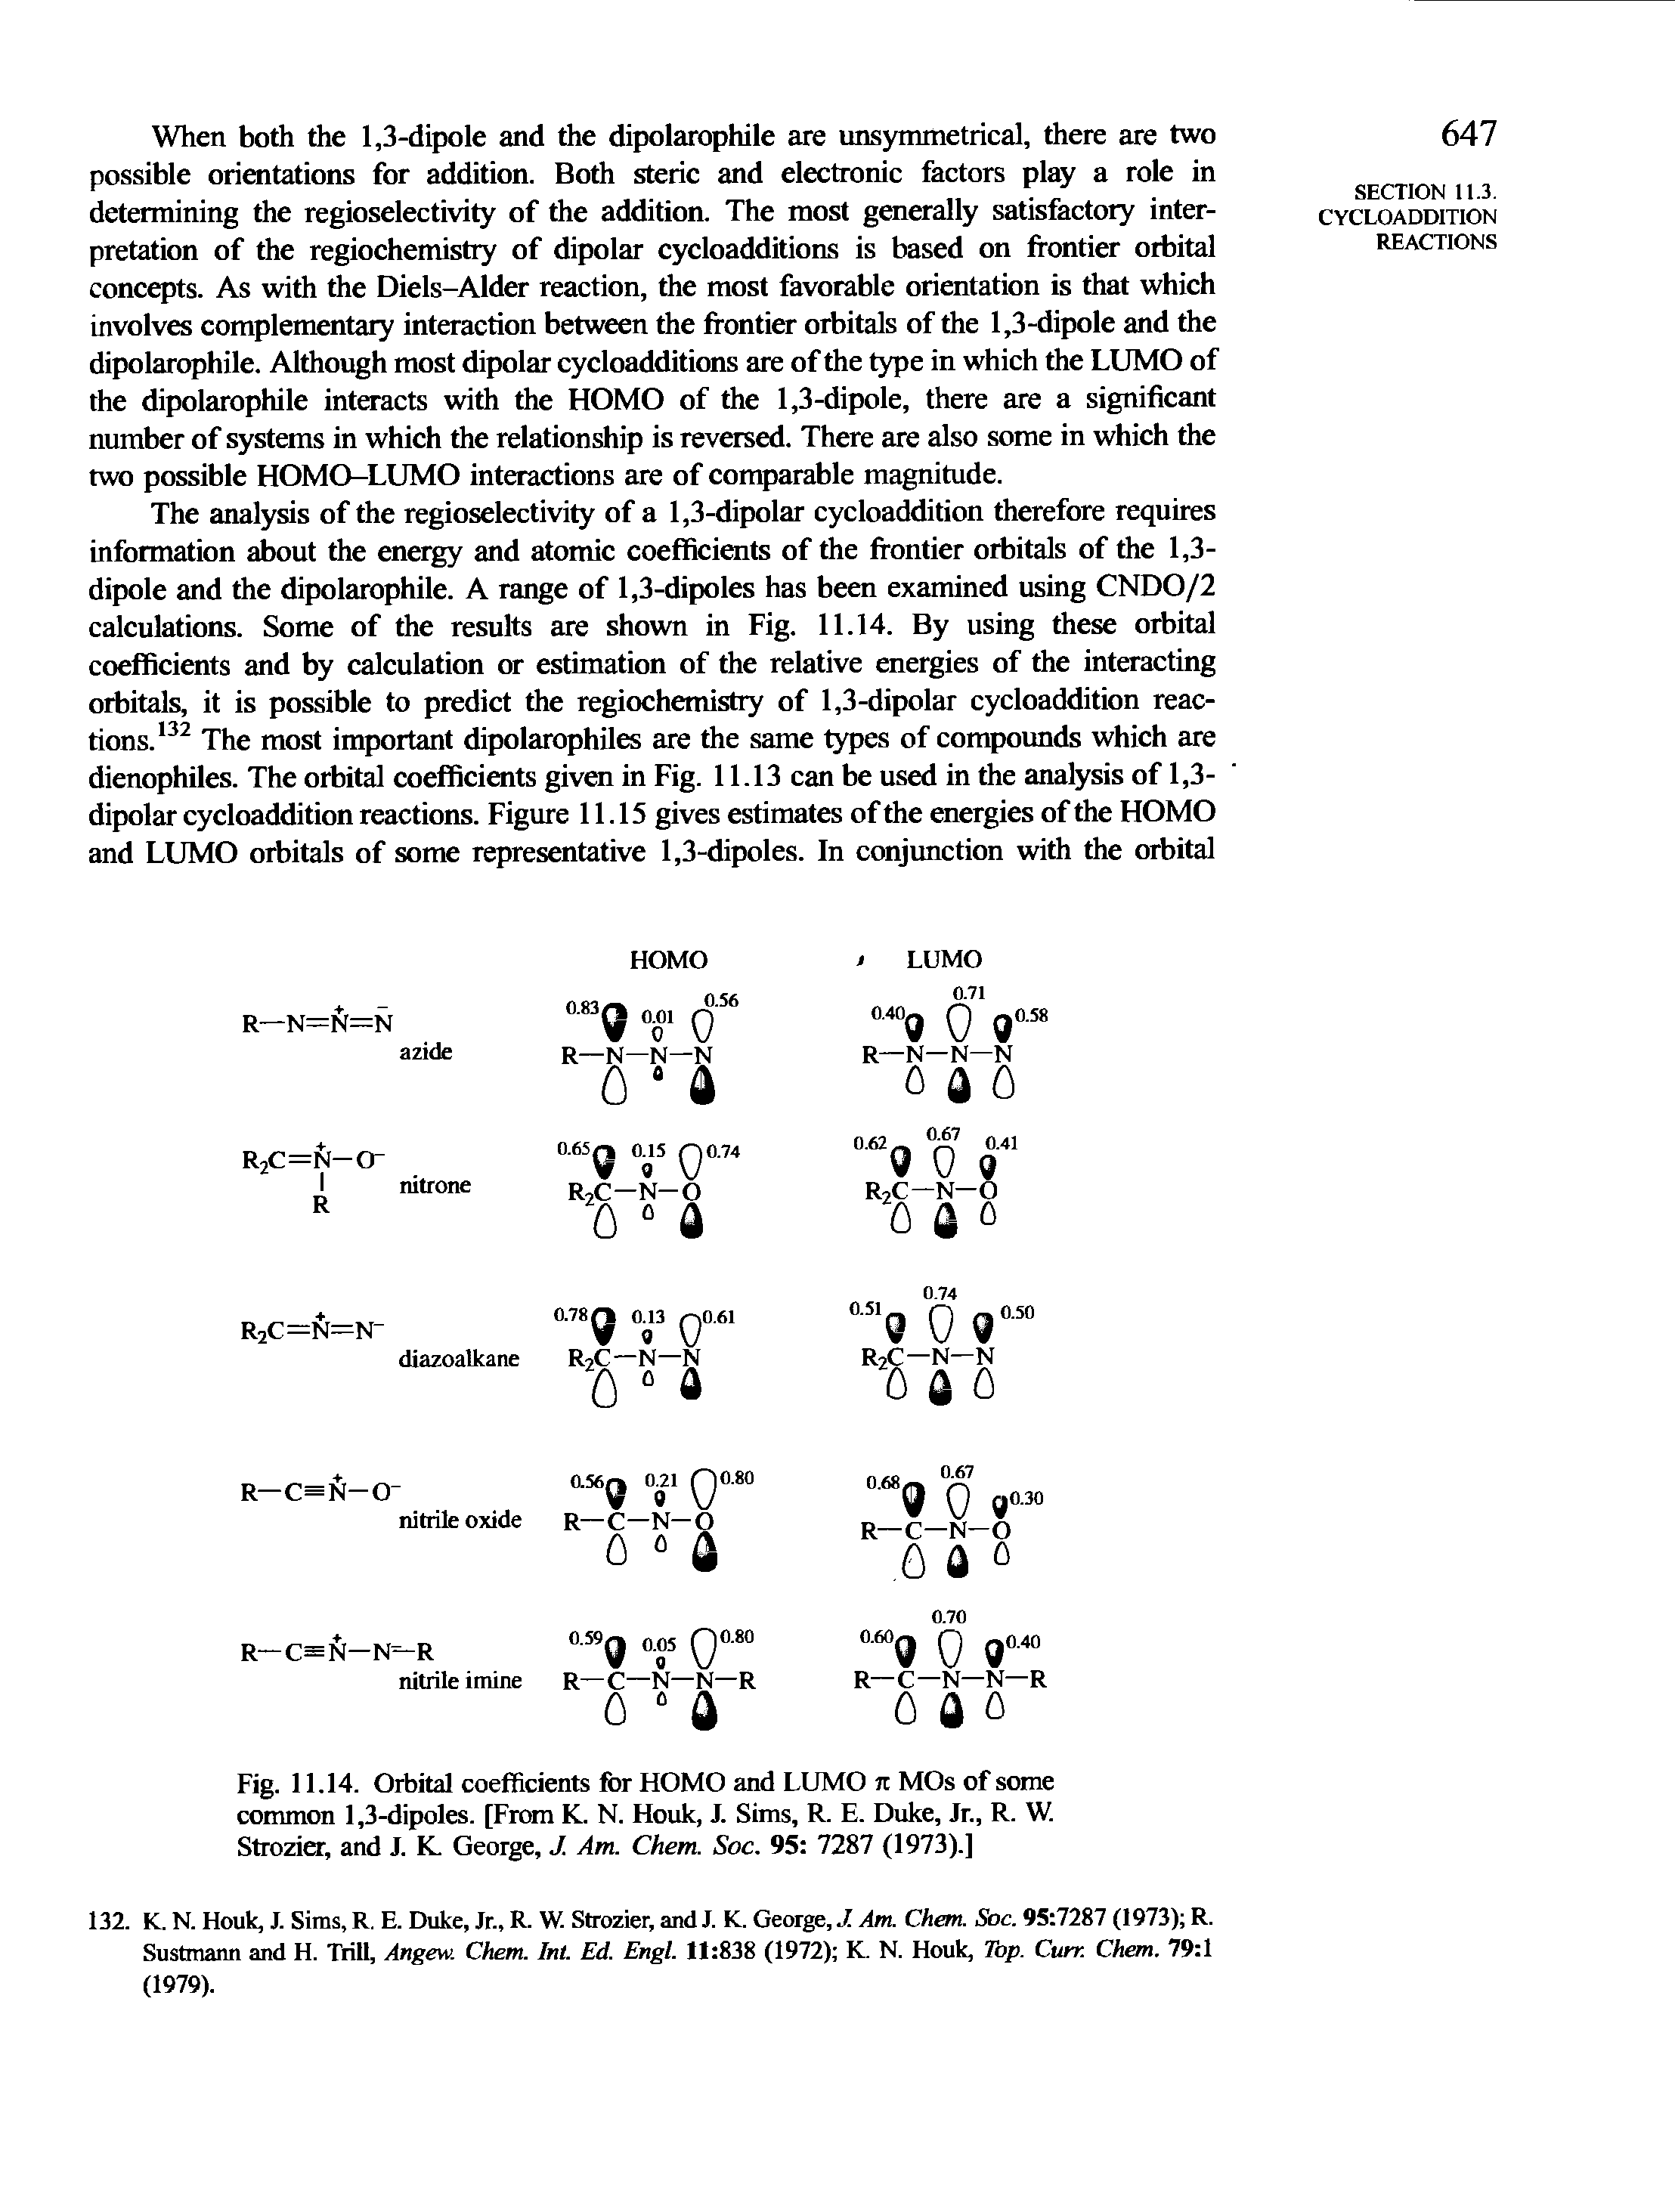 Fig. 11.14. Orbital coefficients for HOMO and LUMO n MOs of some common 1,3-dipoles. [From K. N. Houk, J. Sims, R. E. Duke, Jr., R. W. Strozier, and J. K. George, J. Am. Chem. Soc. 95 7287 (1973).]...